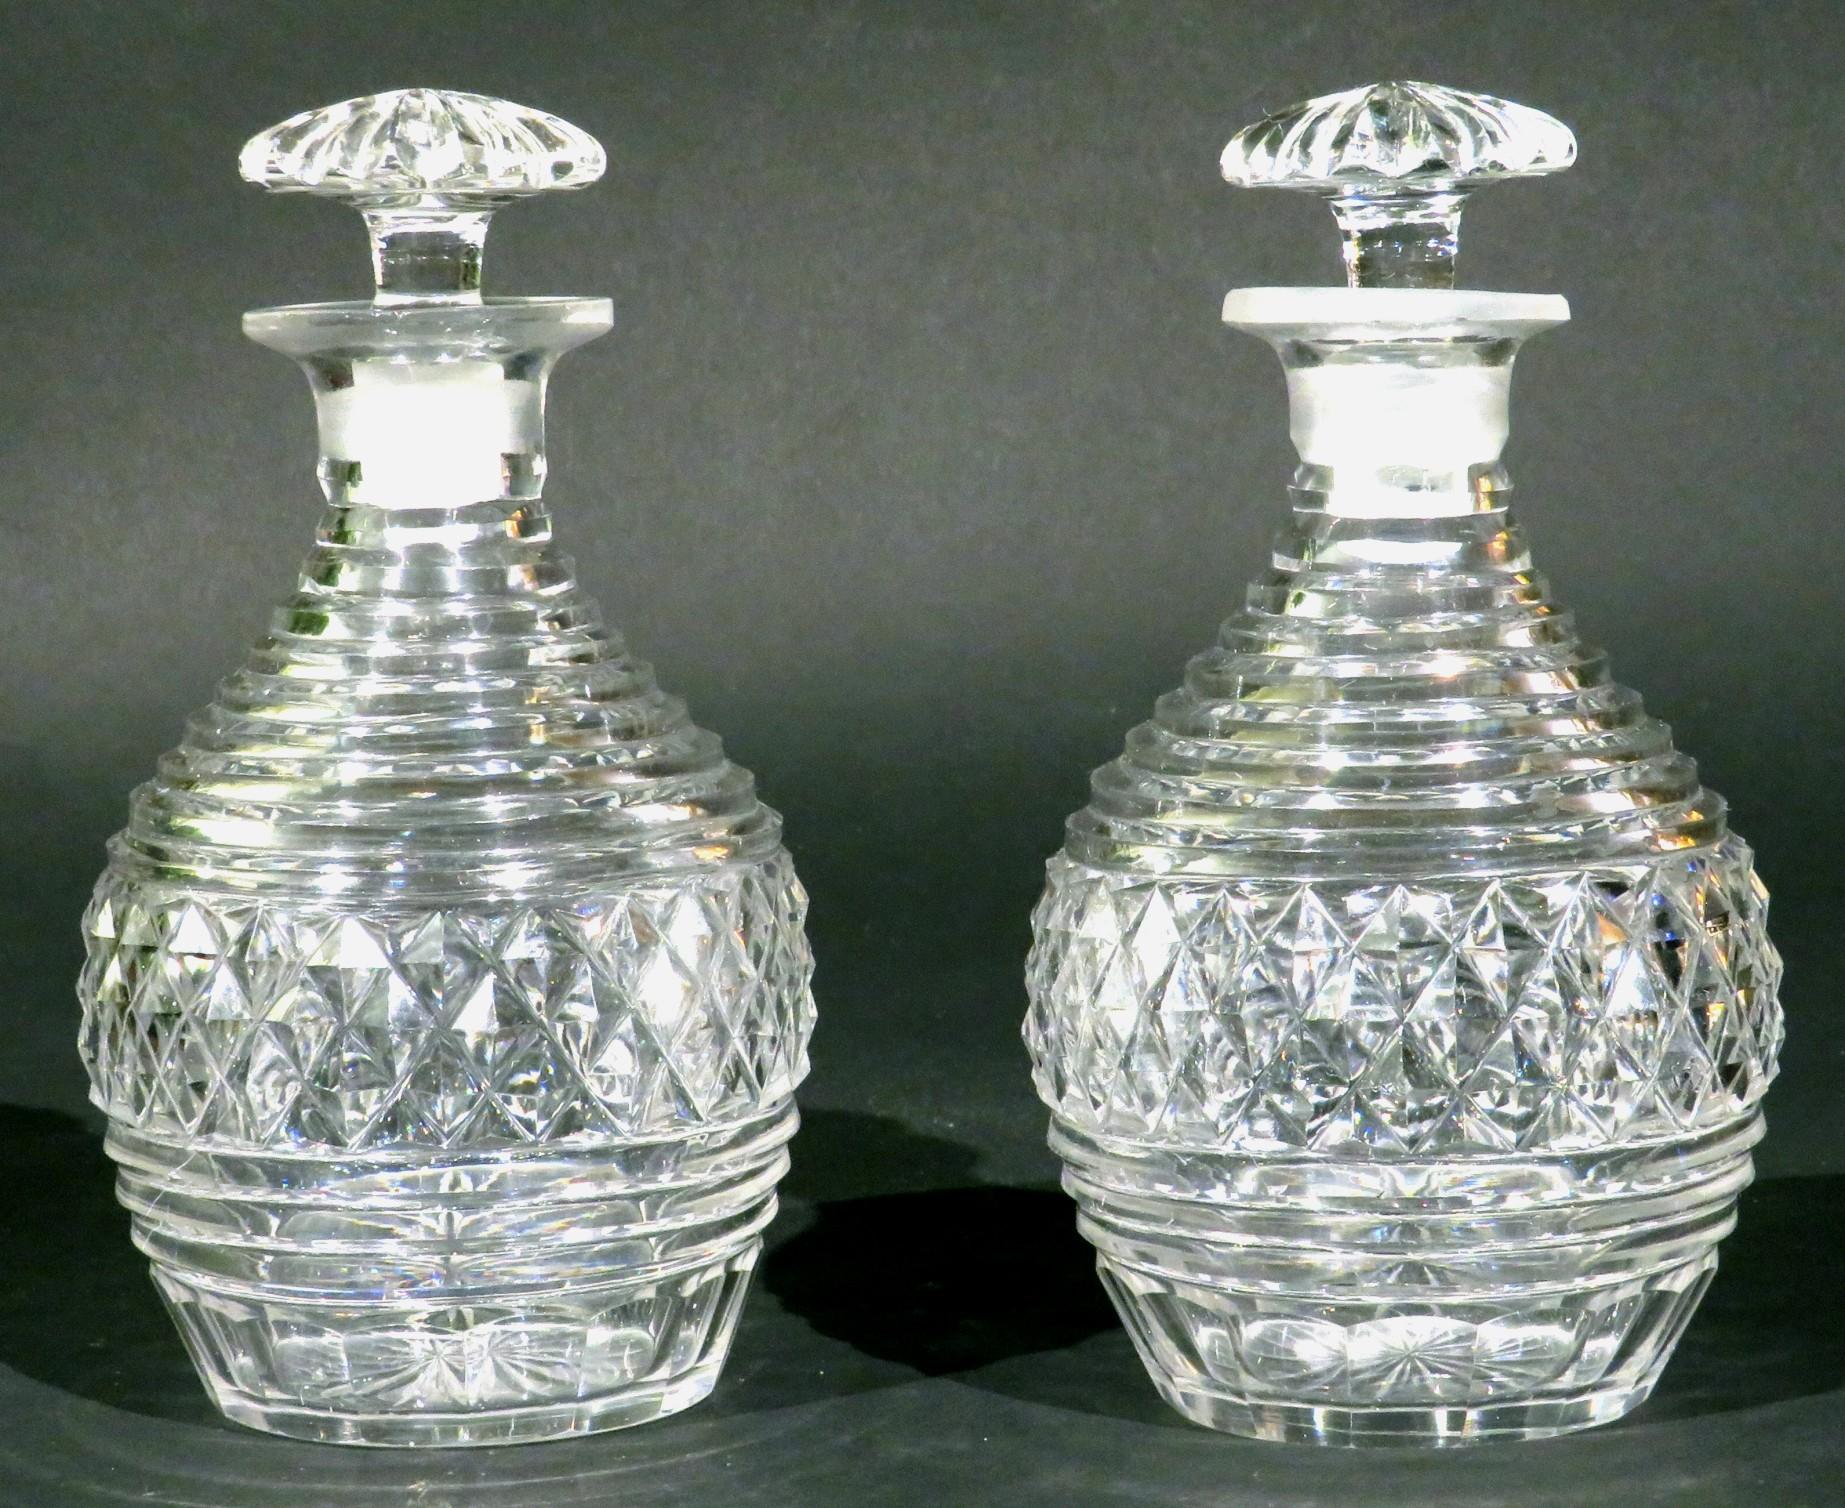 British Pair of Georgian Anglo-Irish Cut Glass Spirit Decanters & Silver Plated Caddy For Sale